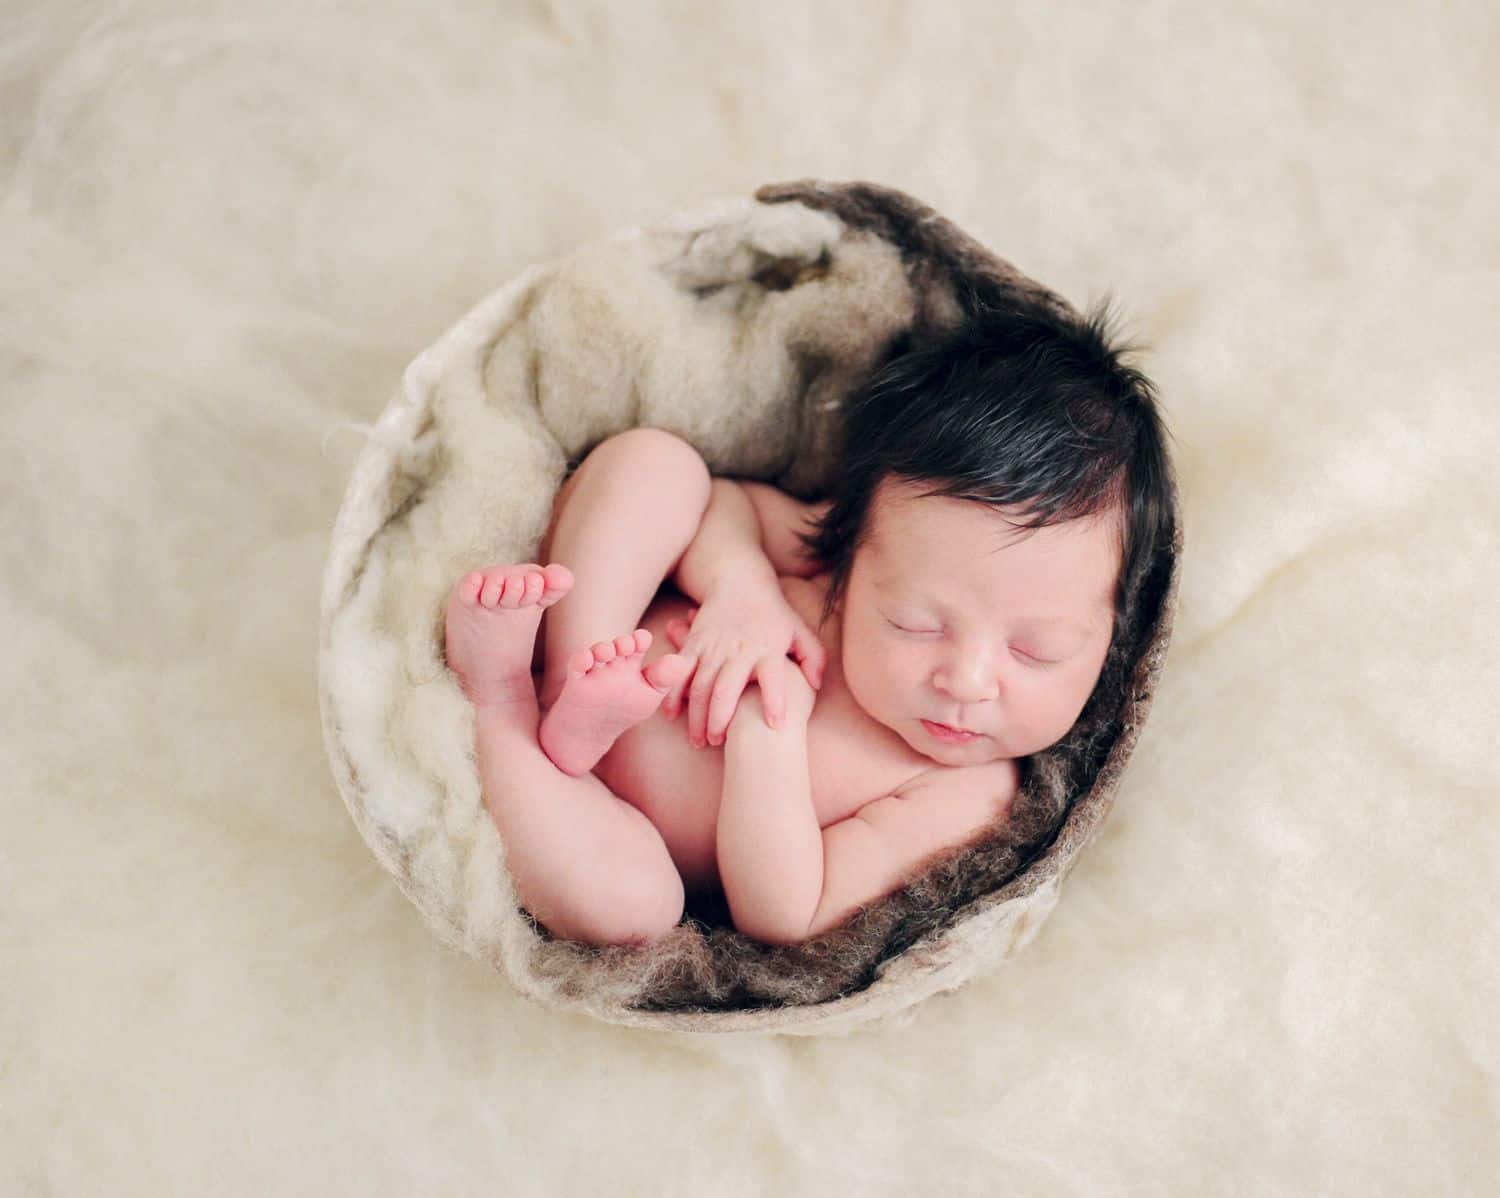 Hate in-person sales? Here’s how to sell albums online! | A newborn client is posed in a small basket, surrounded by fleece blankets.